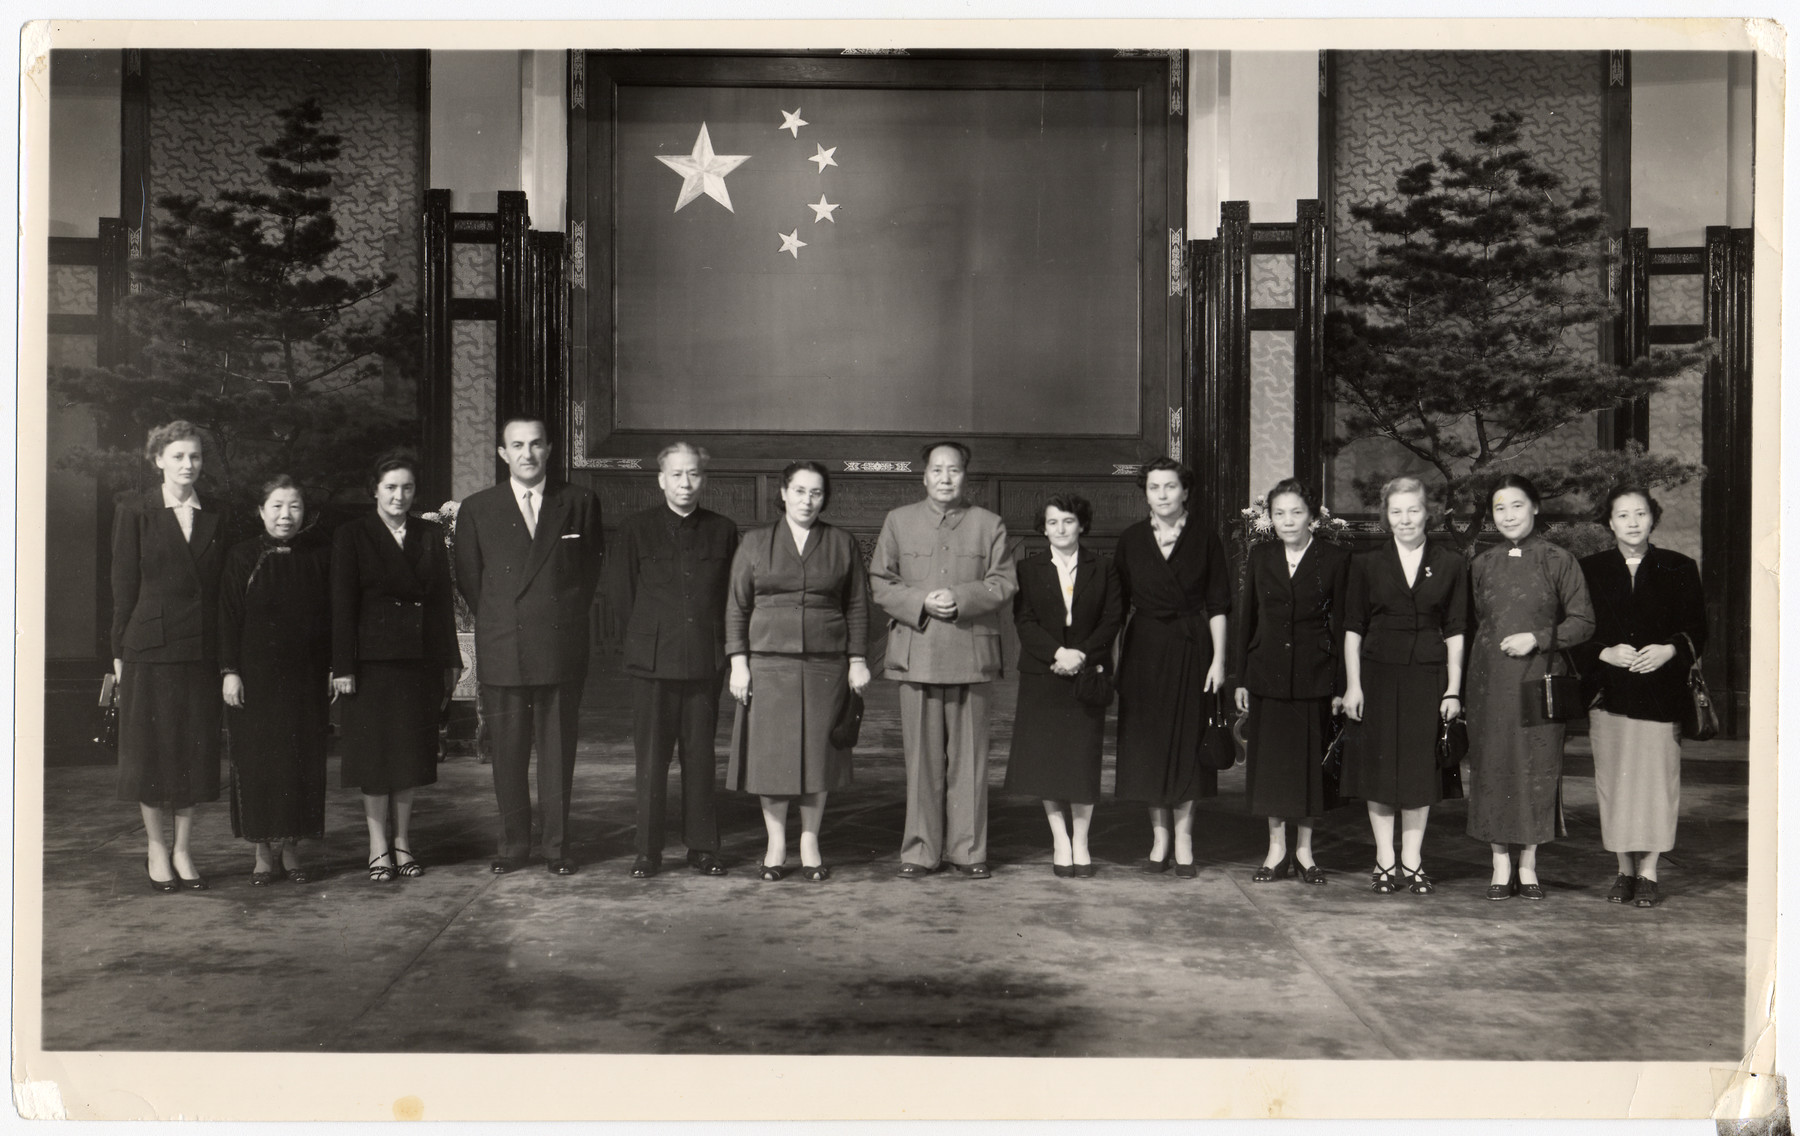 Members of the Yugoslav delegation to China pose with Mao Zedong, in front of the flag of the People's Republic of China.

Among those pictured are Mao Zedong (center) and Jamila Kolonomos (to his left).